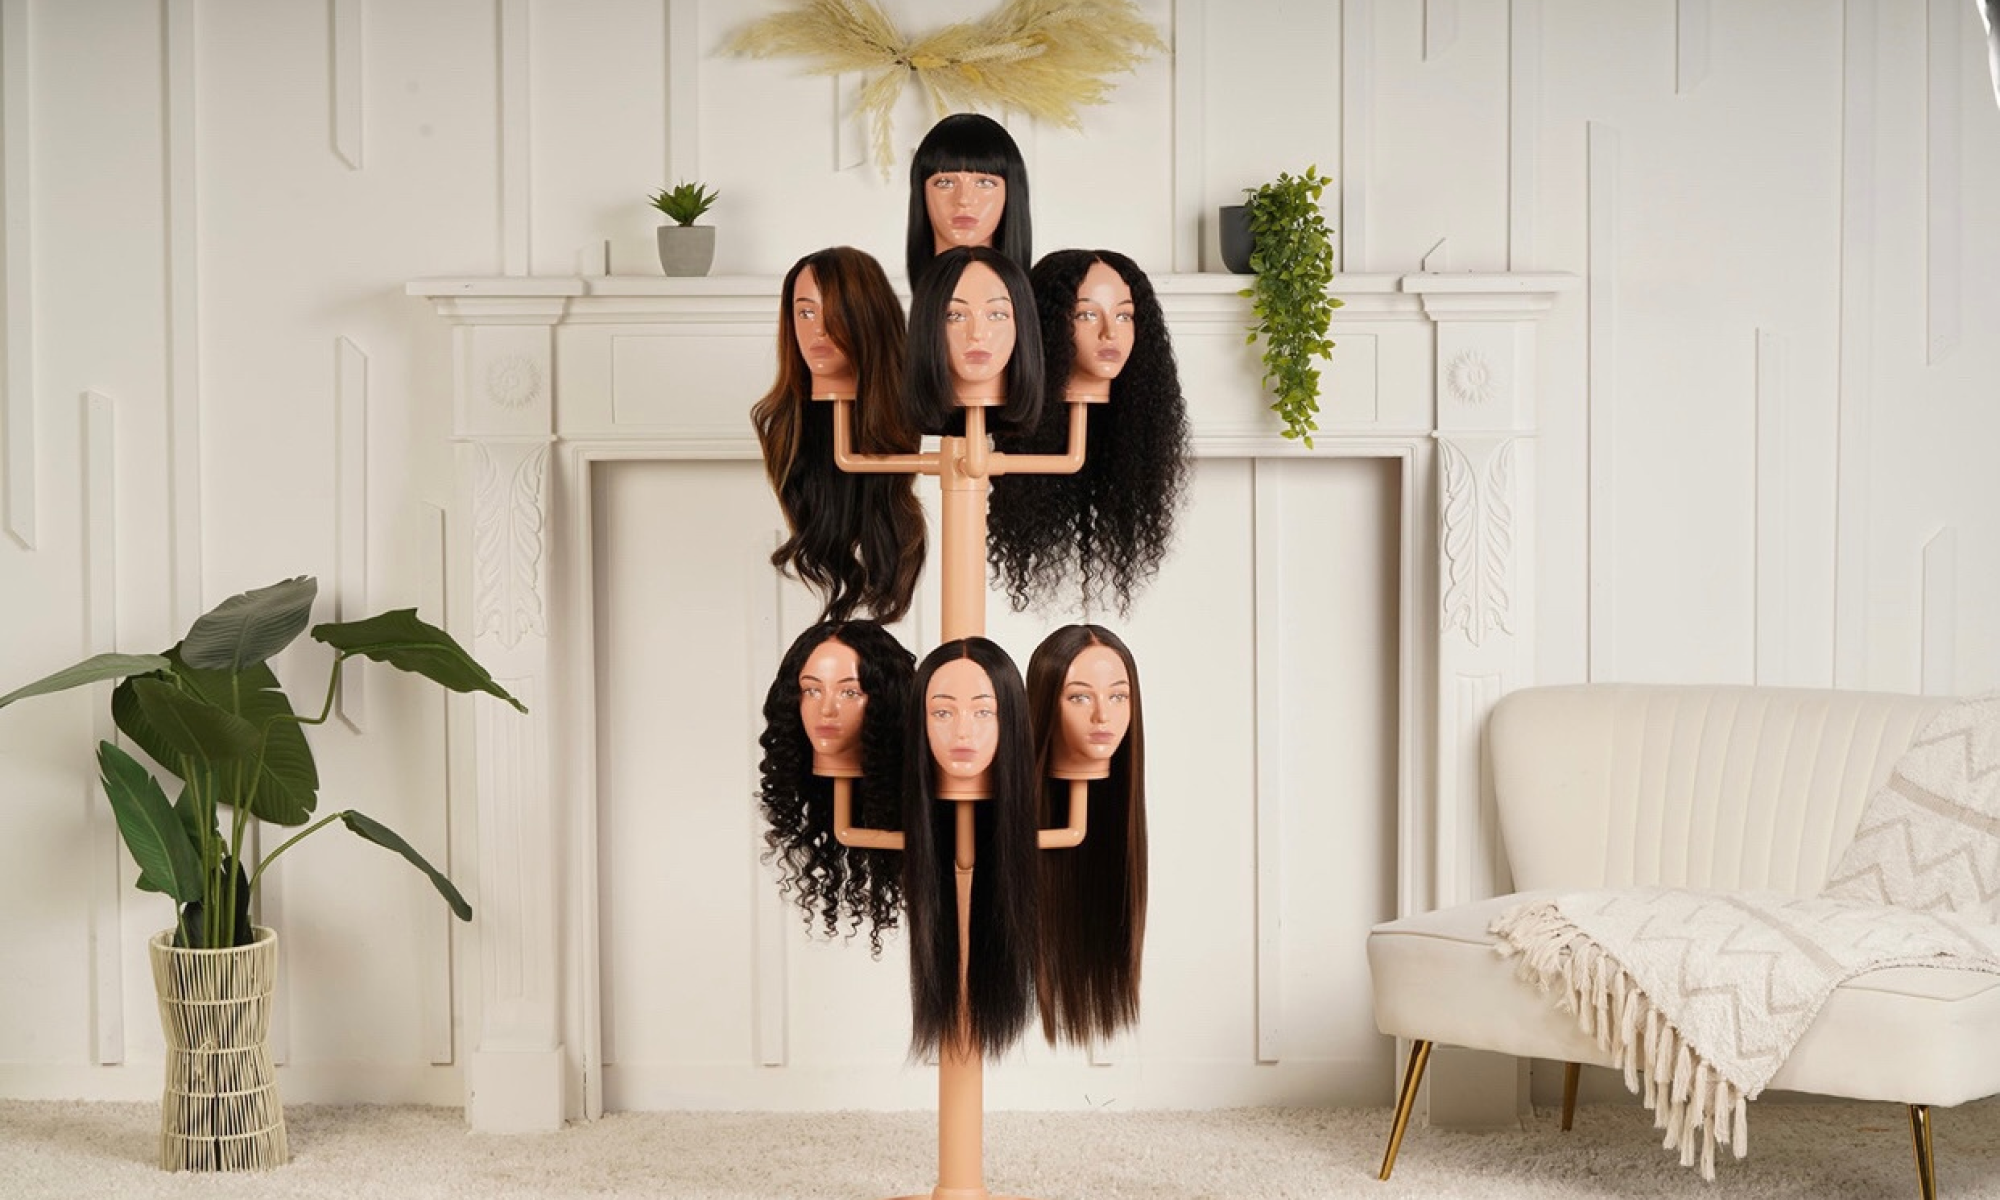 The wig hanger with 7 mannequin head worn with wigs in a living room.